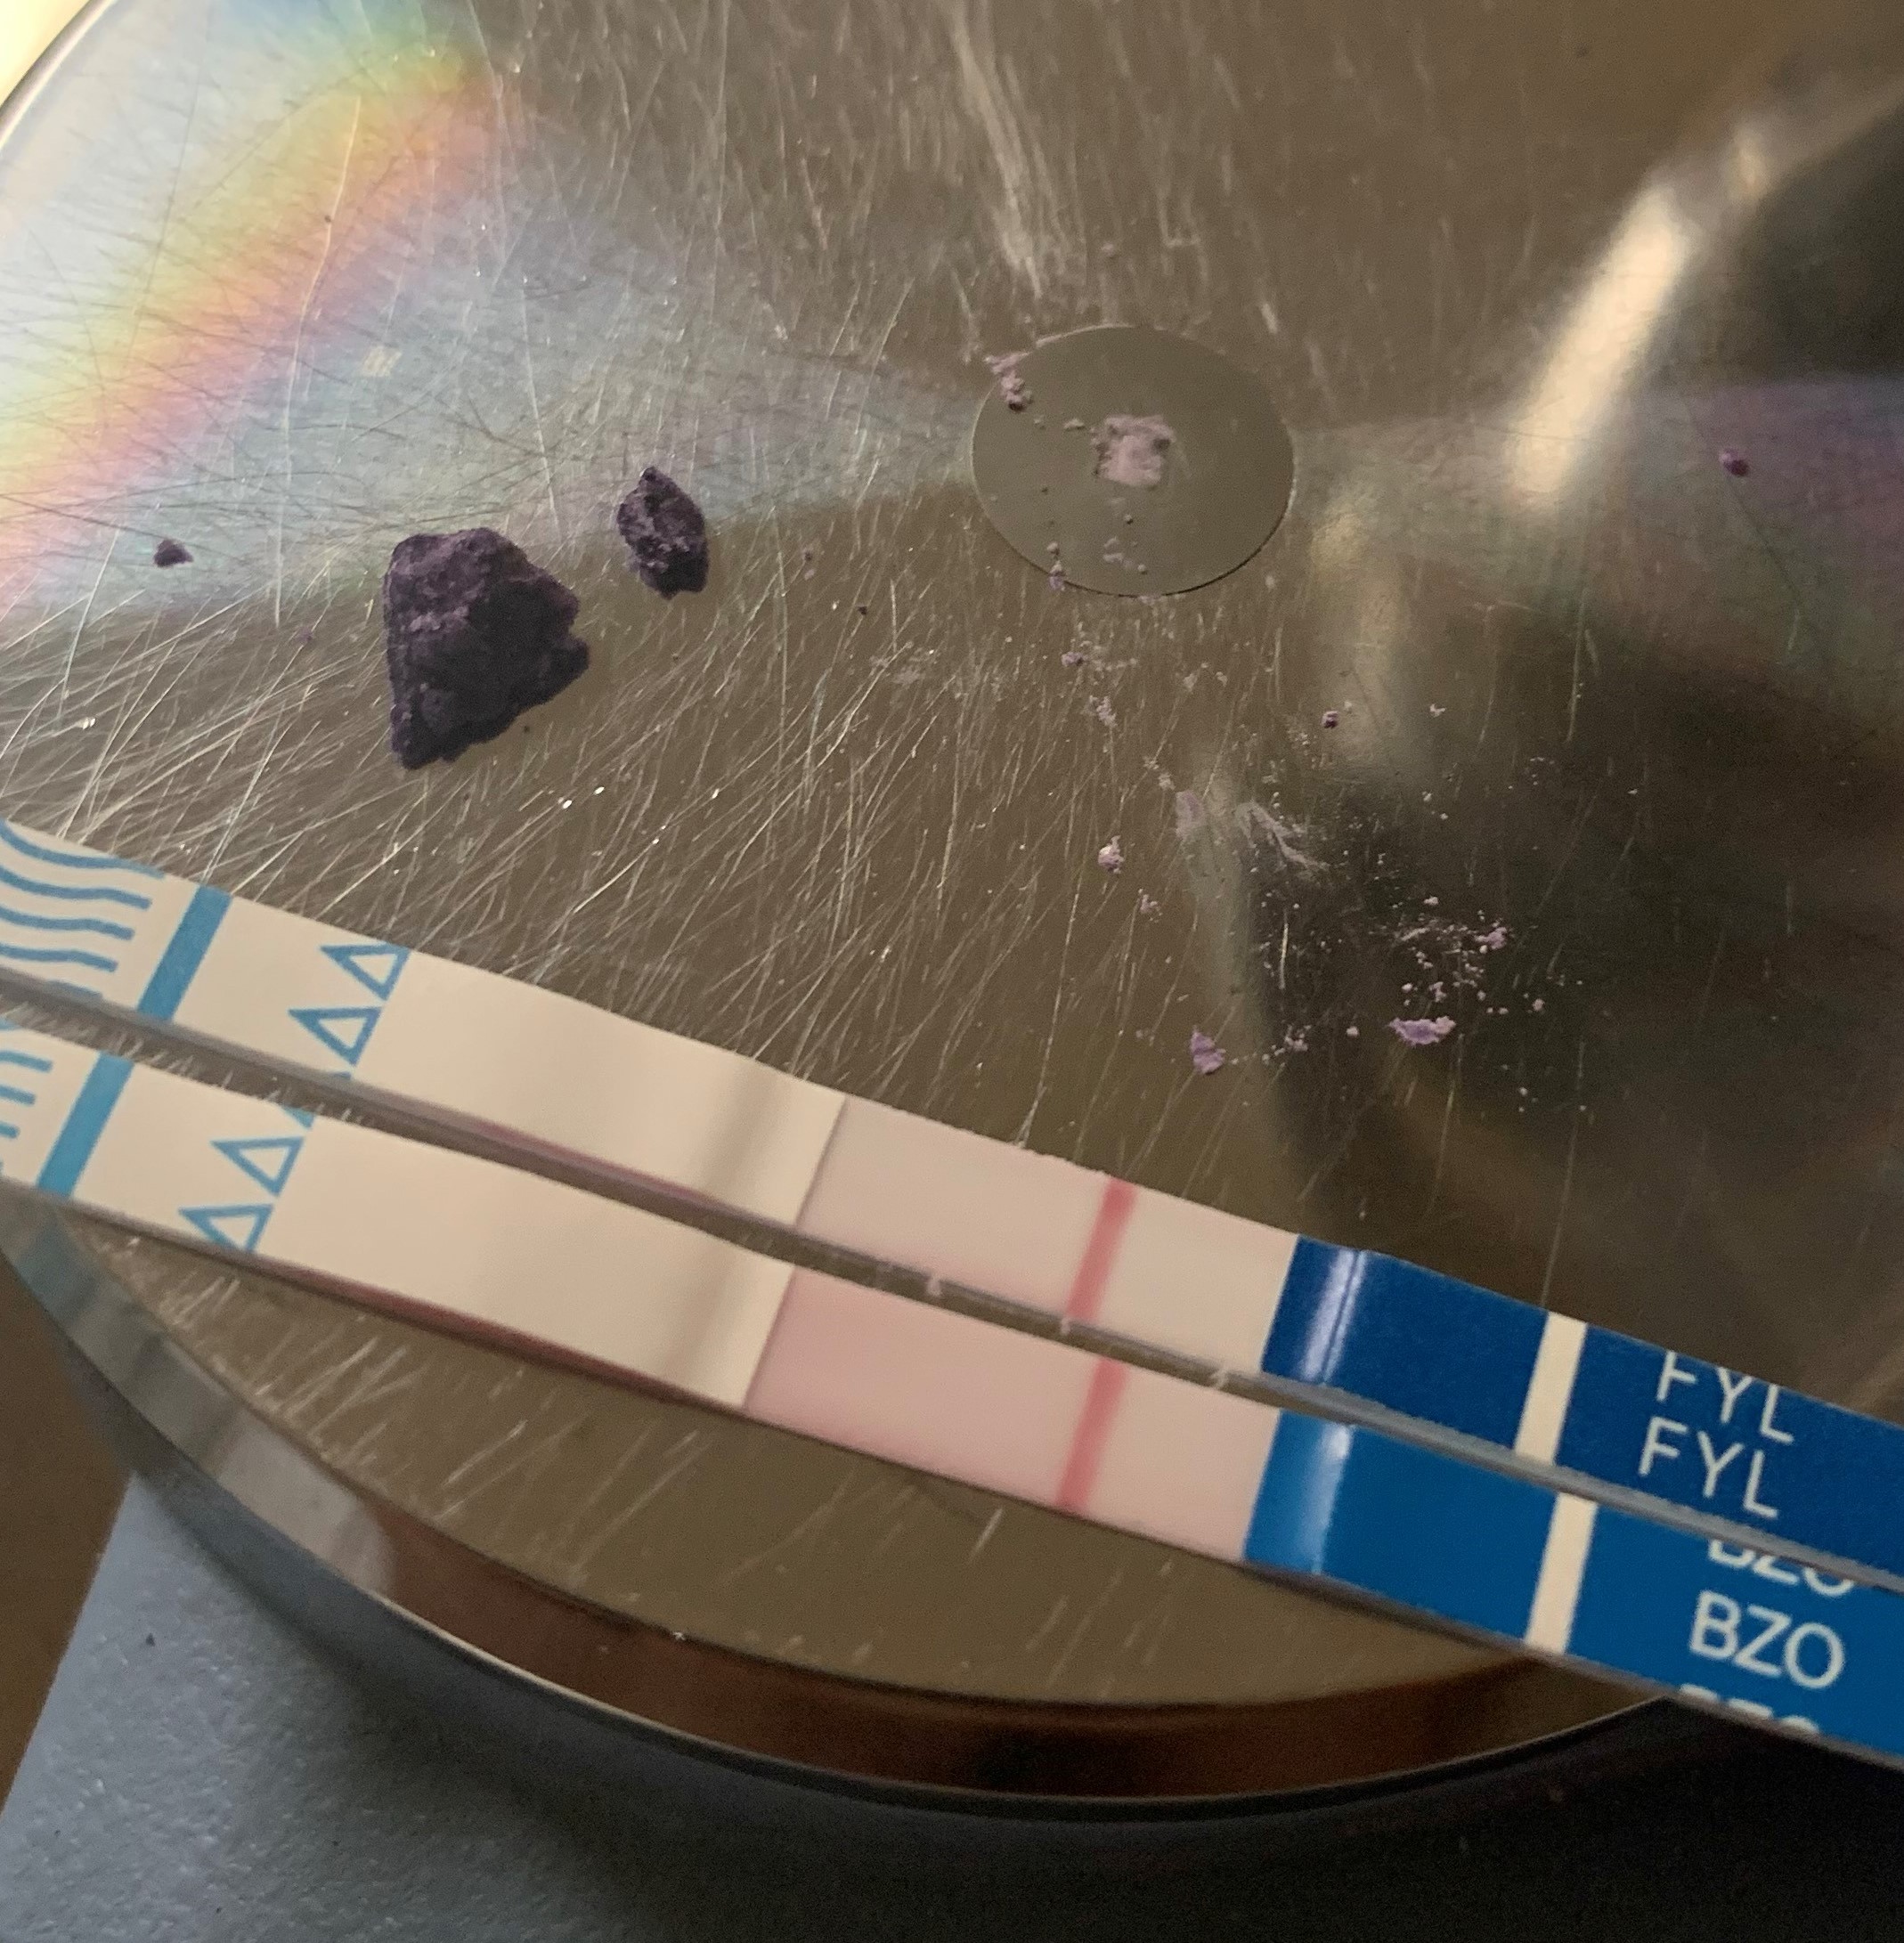 Purple “down” contains high amounts of fentanyl and benzos